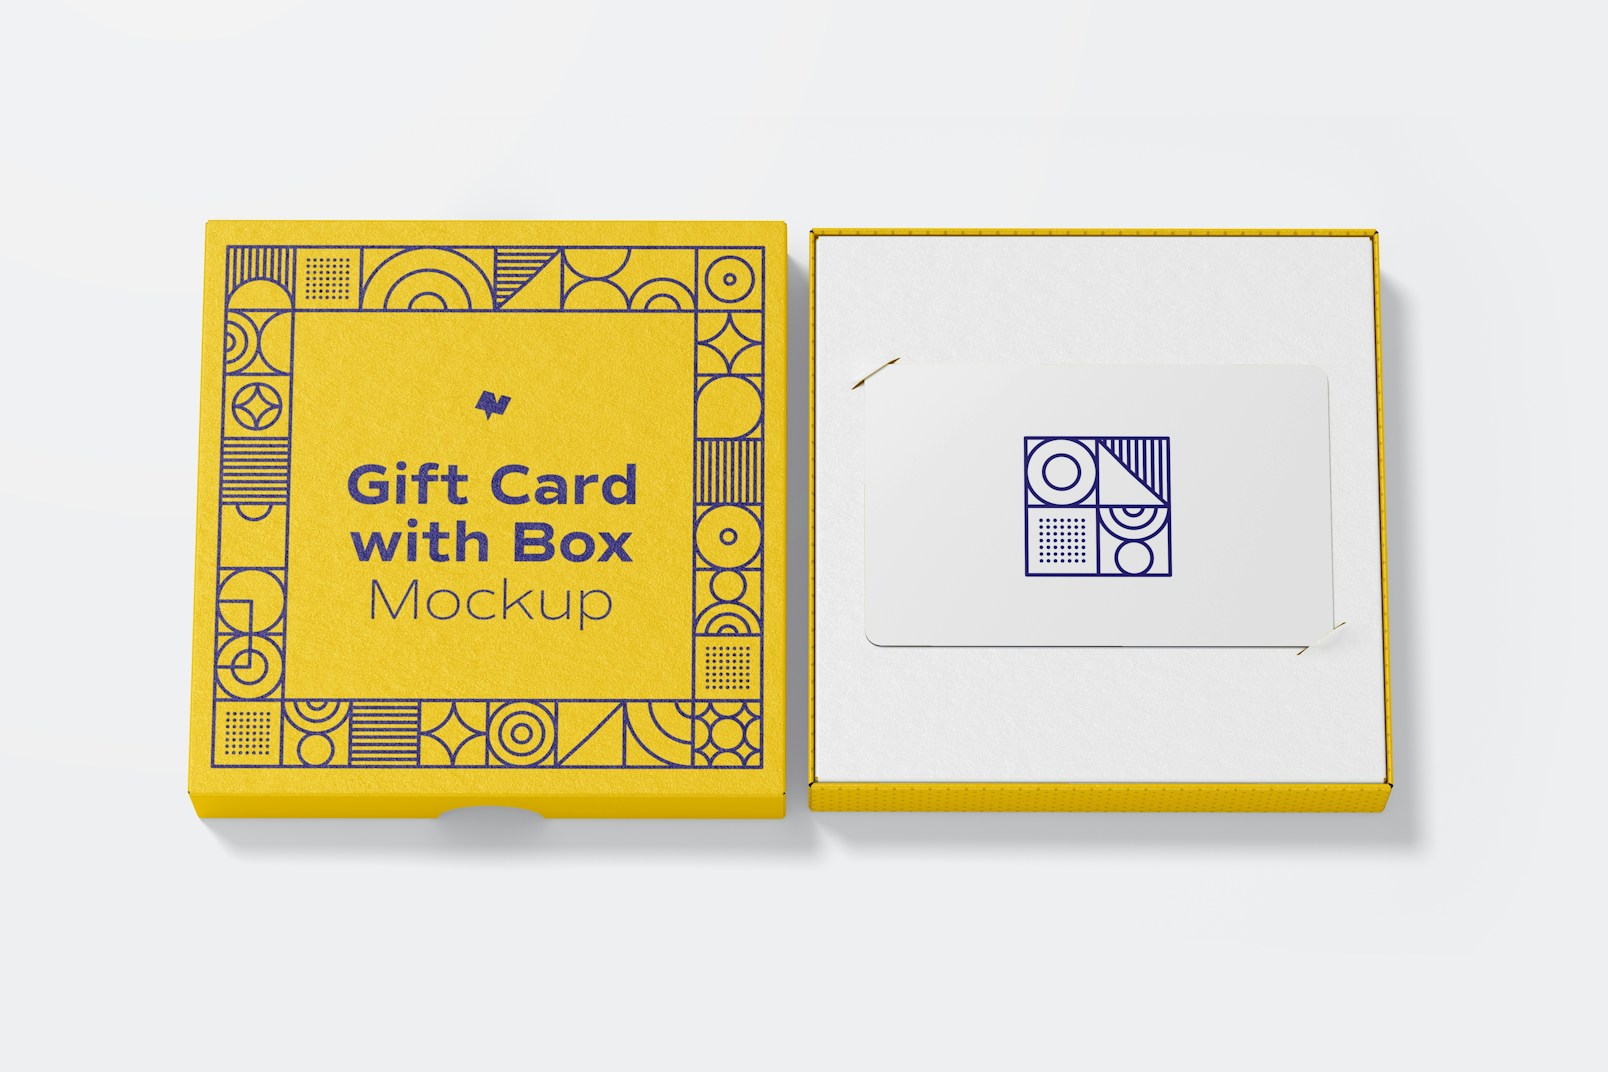 Gift Card with Box Mockup, Top View